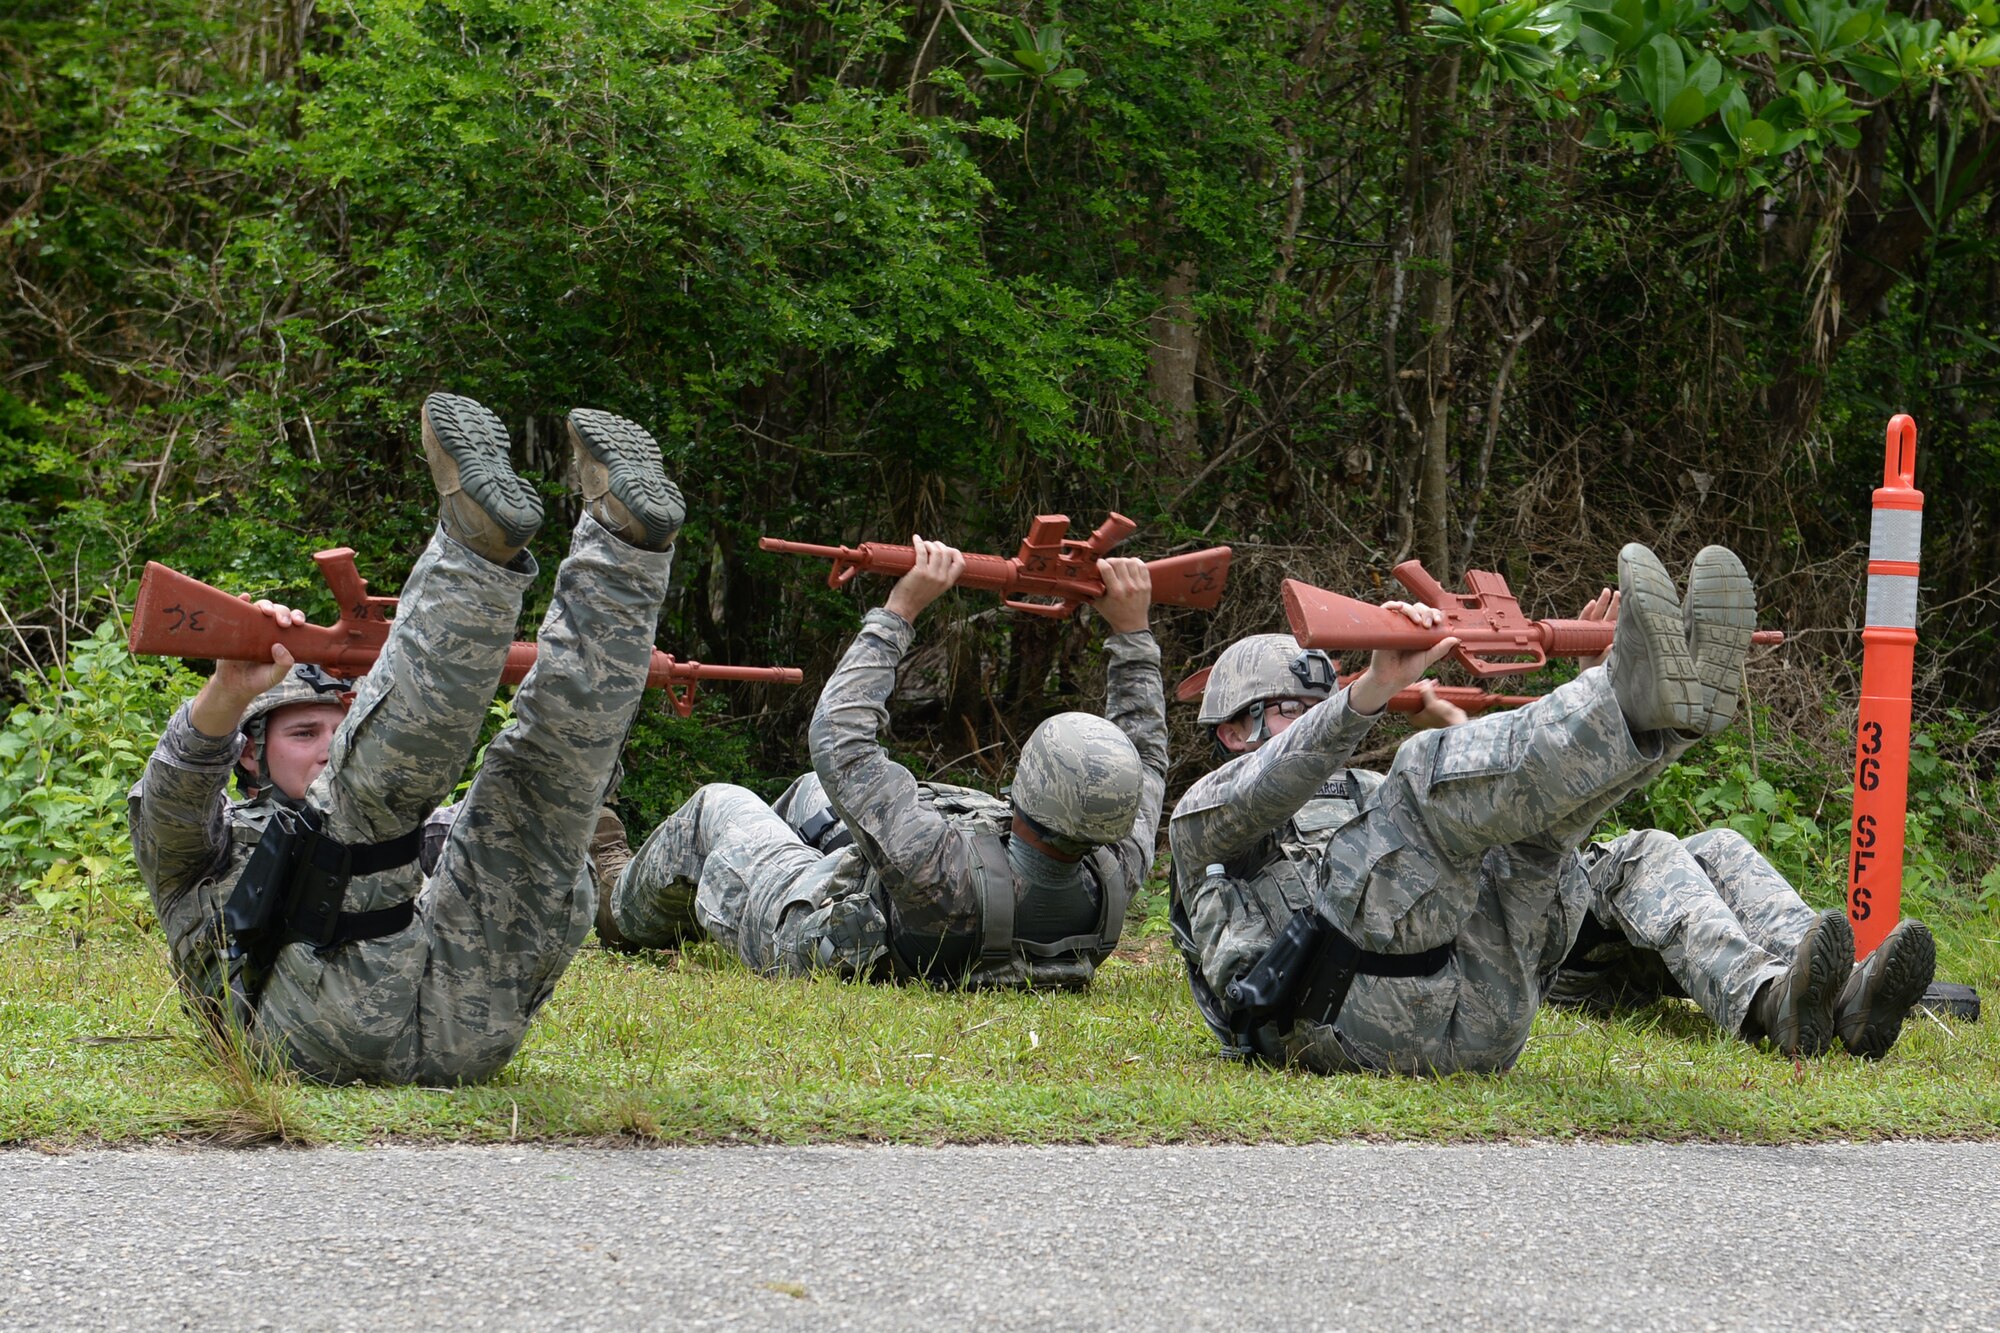 Airmen from the 36th Security Forces Squadron perform knee-ups while holding a training weapon during the Defender Challenge June 22, 2015, at Andersen Air Force Base, Guam. Airmen tested their physical and mental strength through various obstacles and challenges during the competition, ending with a live-fire shooting course. (U.S. Air Force photo by Airman 1st Class Joshua Smoot/Released)